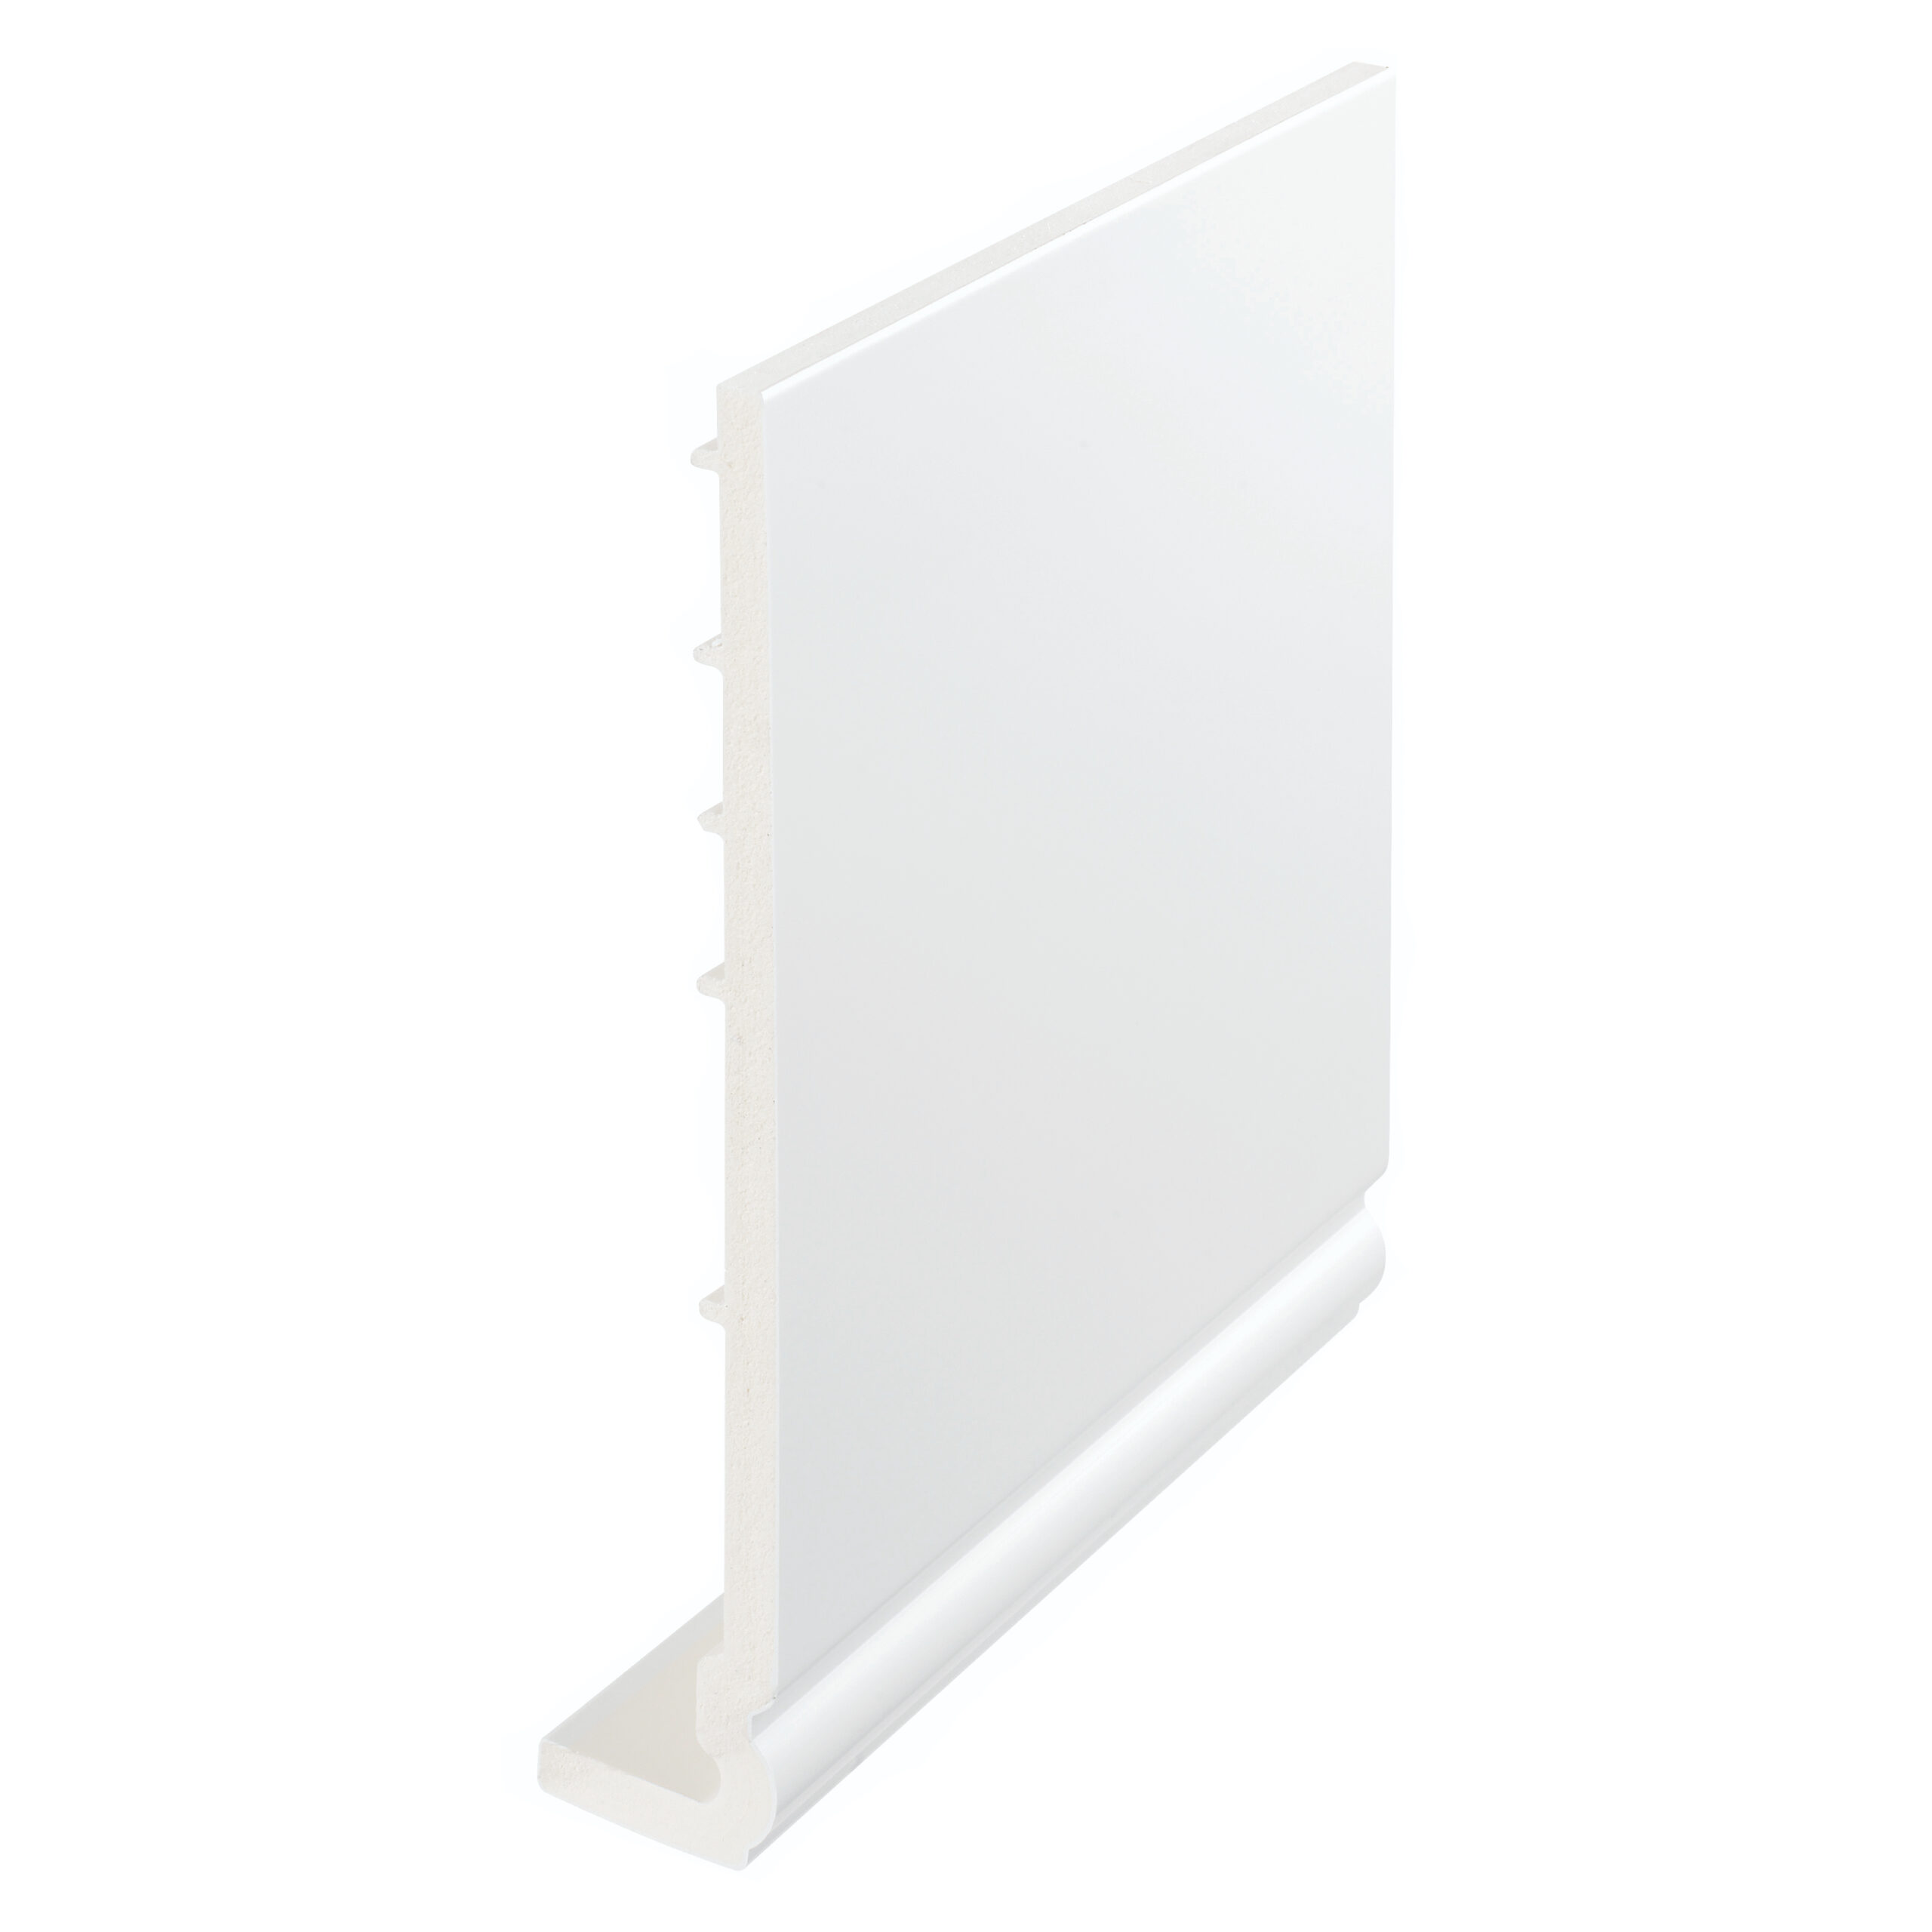 9mm Ogee Capping Board White